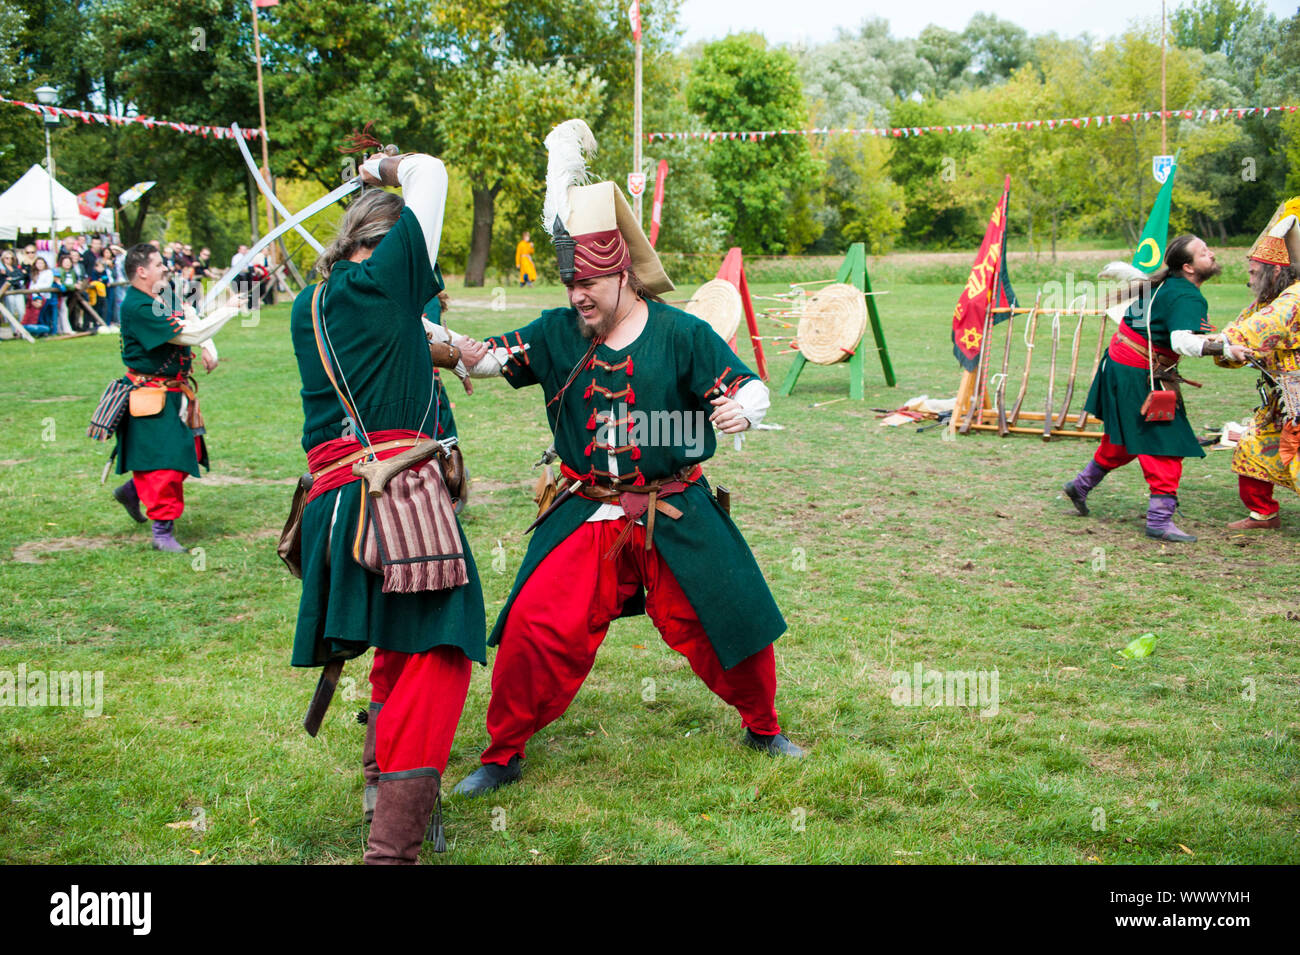 Live show by a Slovak group of performers depicting Turkish medieval soldiers in action. Historical festival at the Pultusk castle in central Poland, Stock Photo